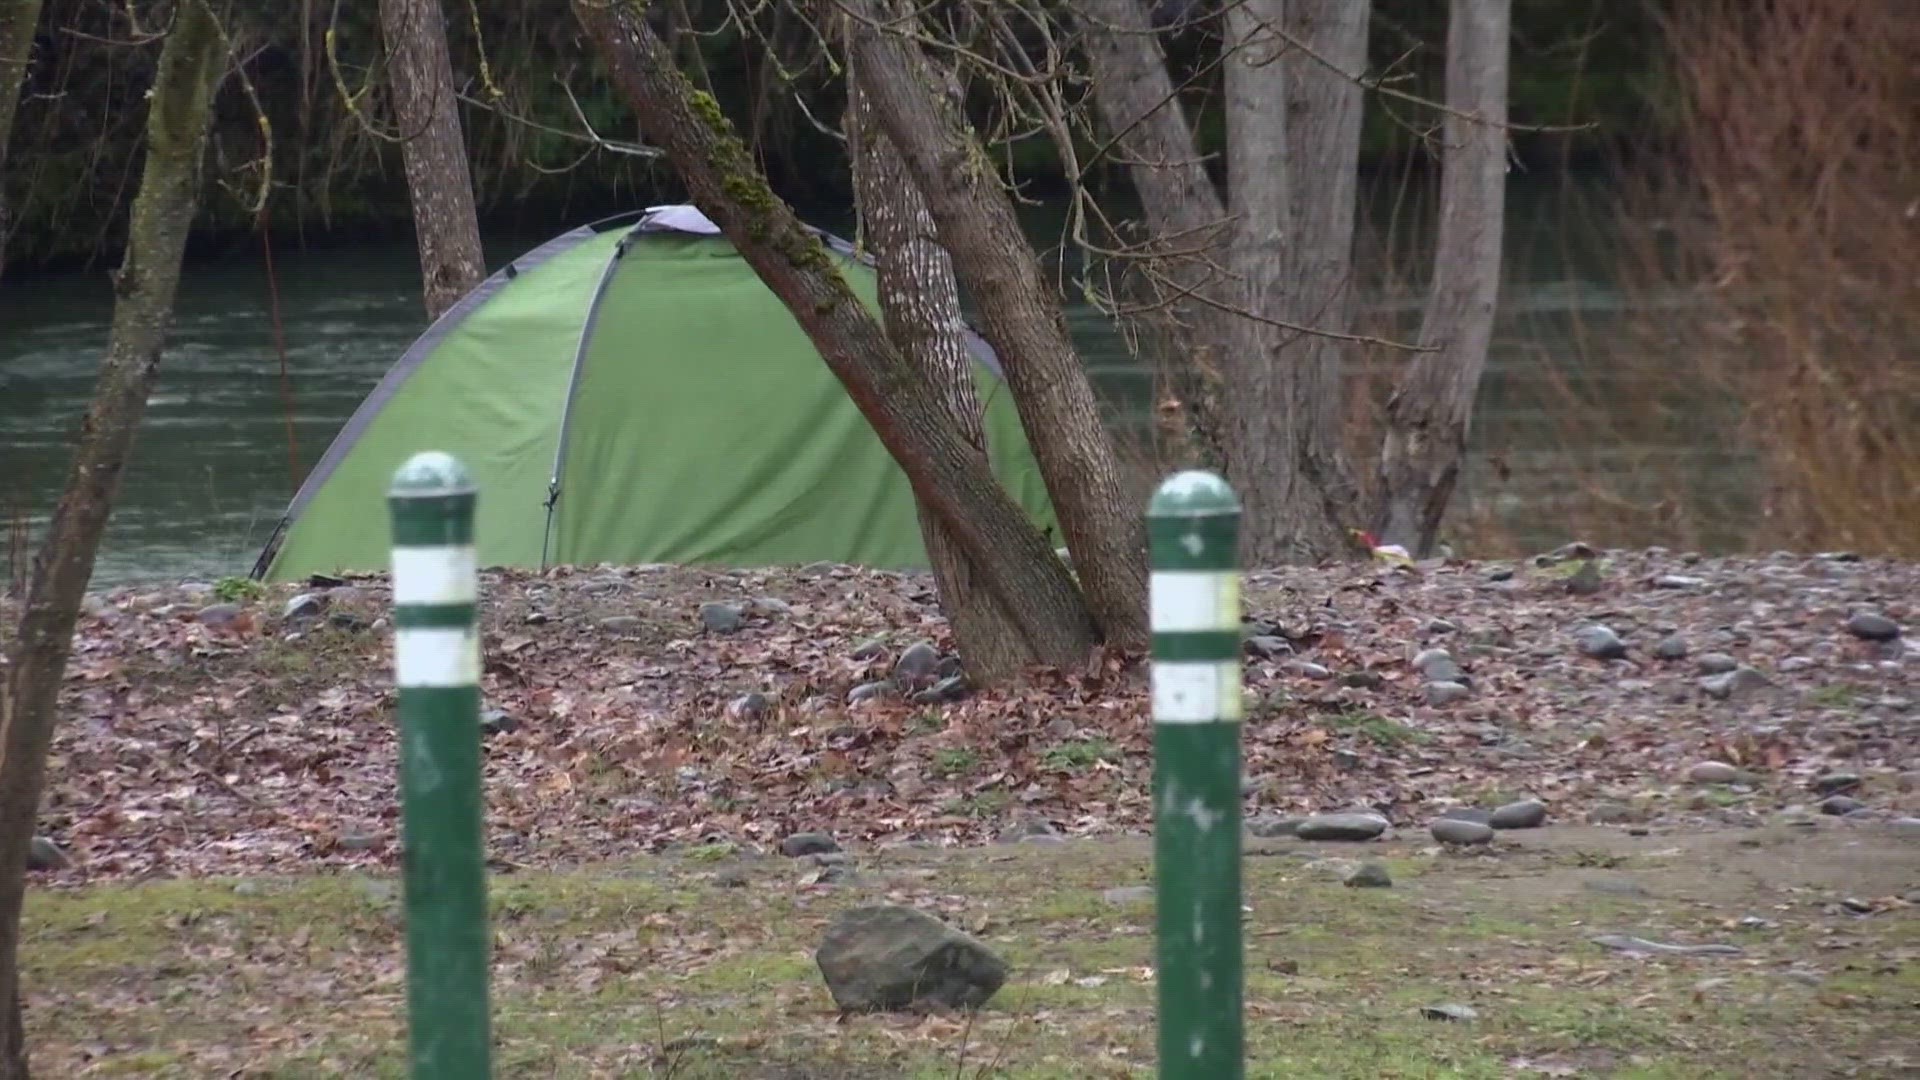 The U.S. Supreme Court was scheduled to hear the case brought by homeless individuals in Oregon, which could set a new precedent.